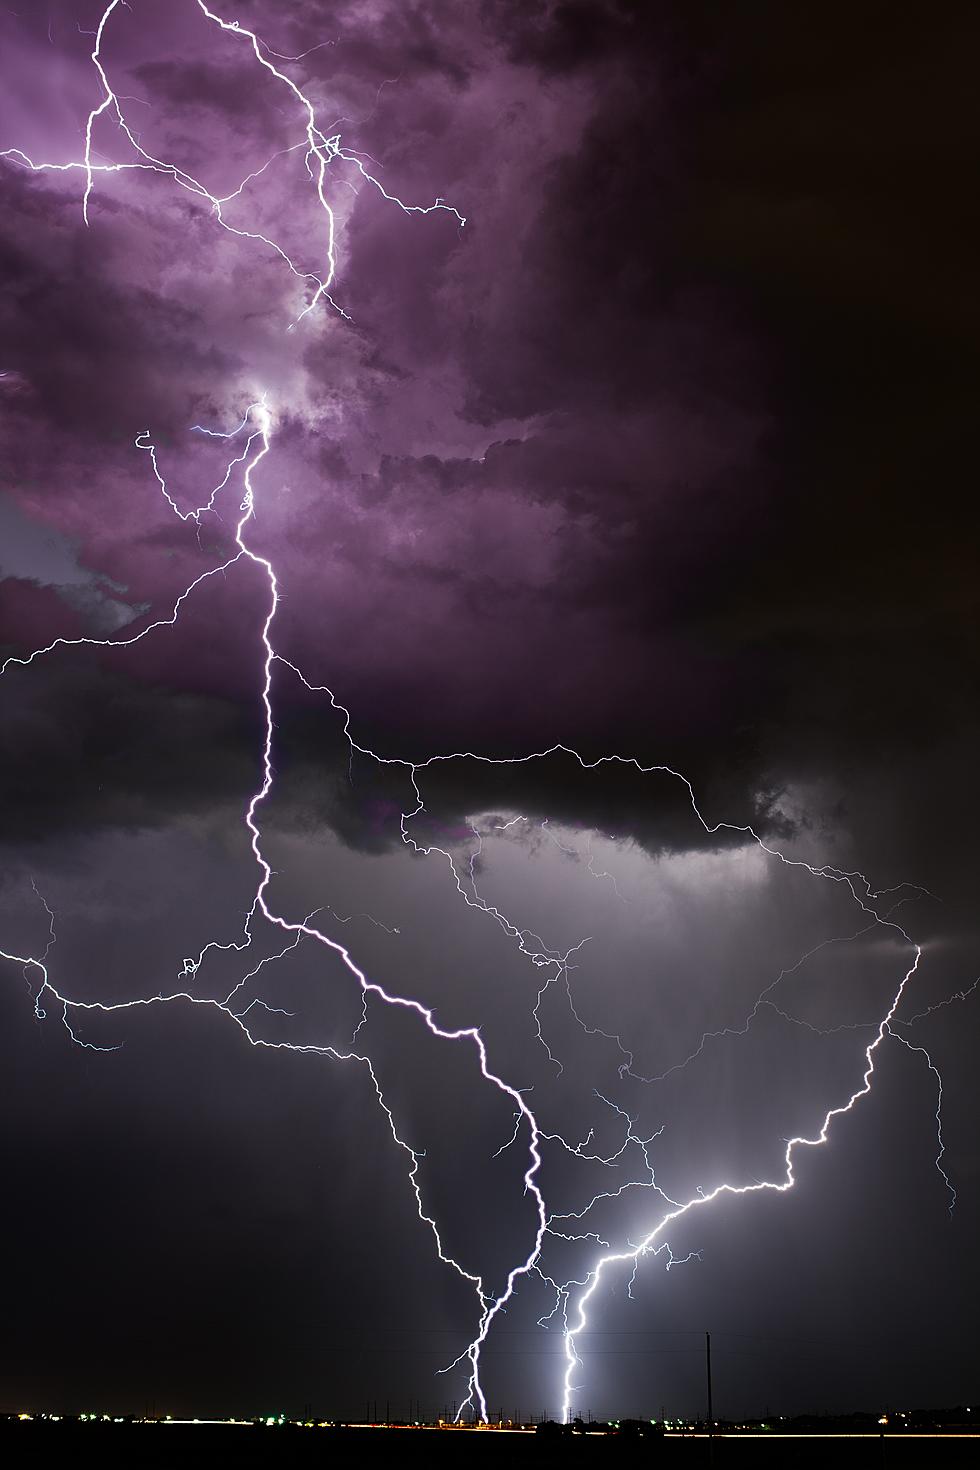 Alabama Woman Hit By Lightning While In Her House